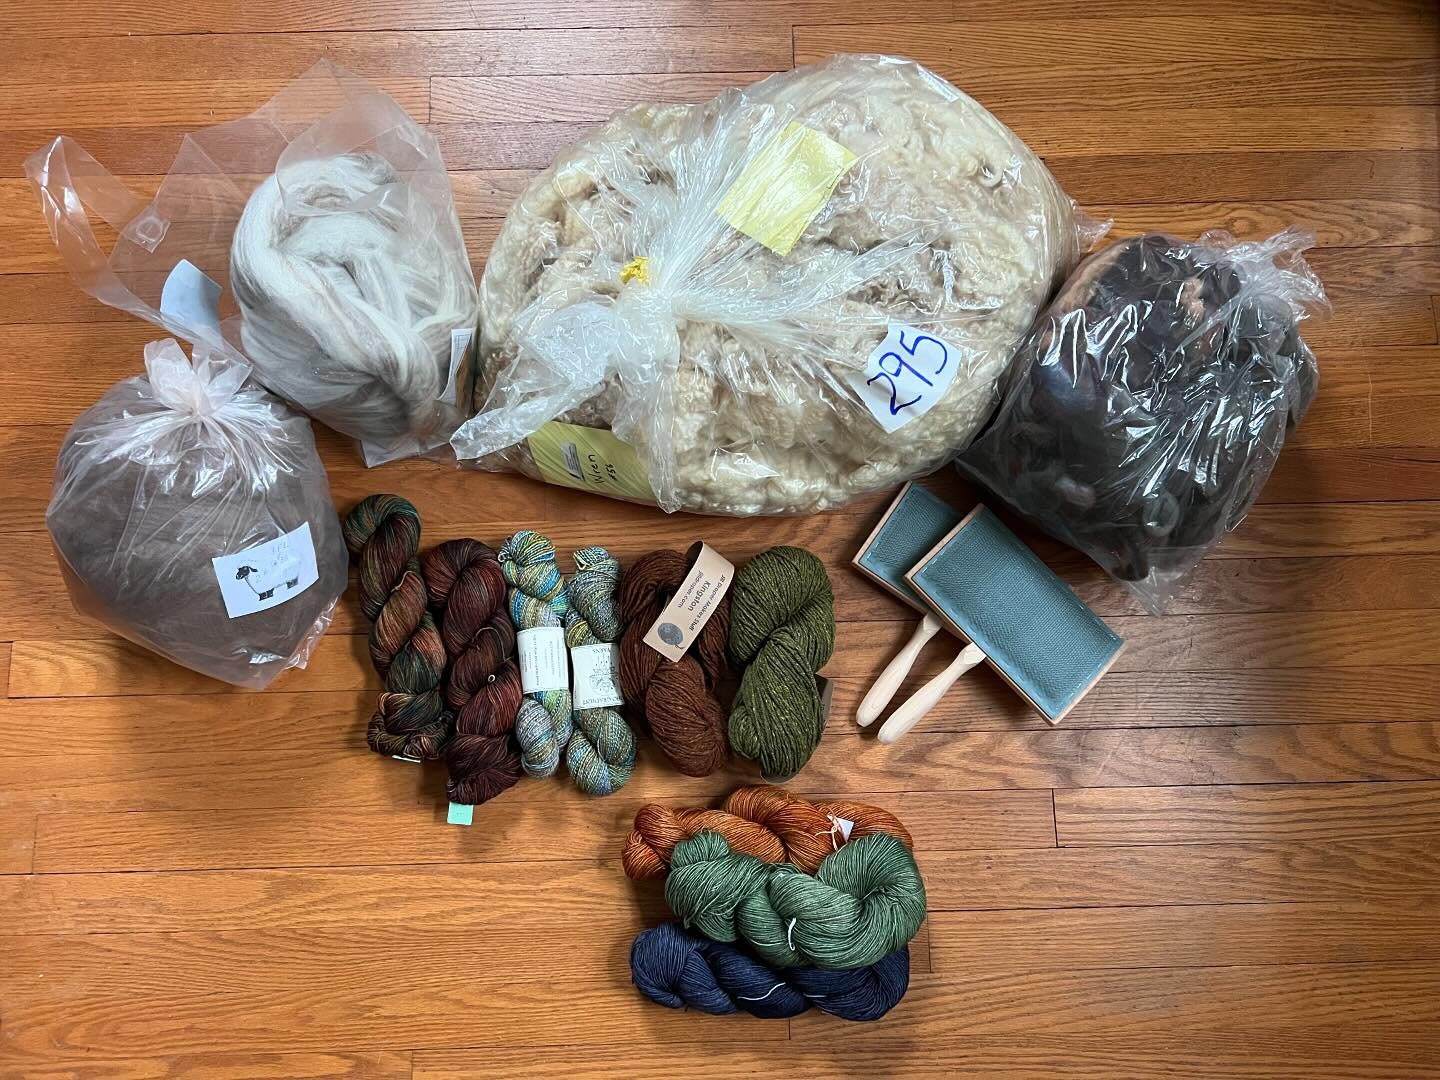 Knitting, spinning, and weaving supplies from the Maryland Sheep &amp; Wool Festival. It was a damp a chilly day, and heaven help me, that big bag is a BFL fleece. What have I done? #jilldrapermakesstuff #imtothewhirled #yarnhygge #bluefieldsfarm #cl